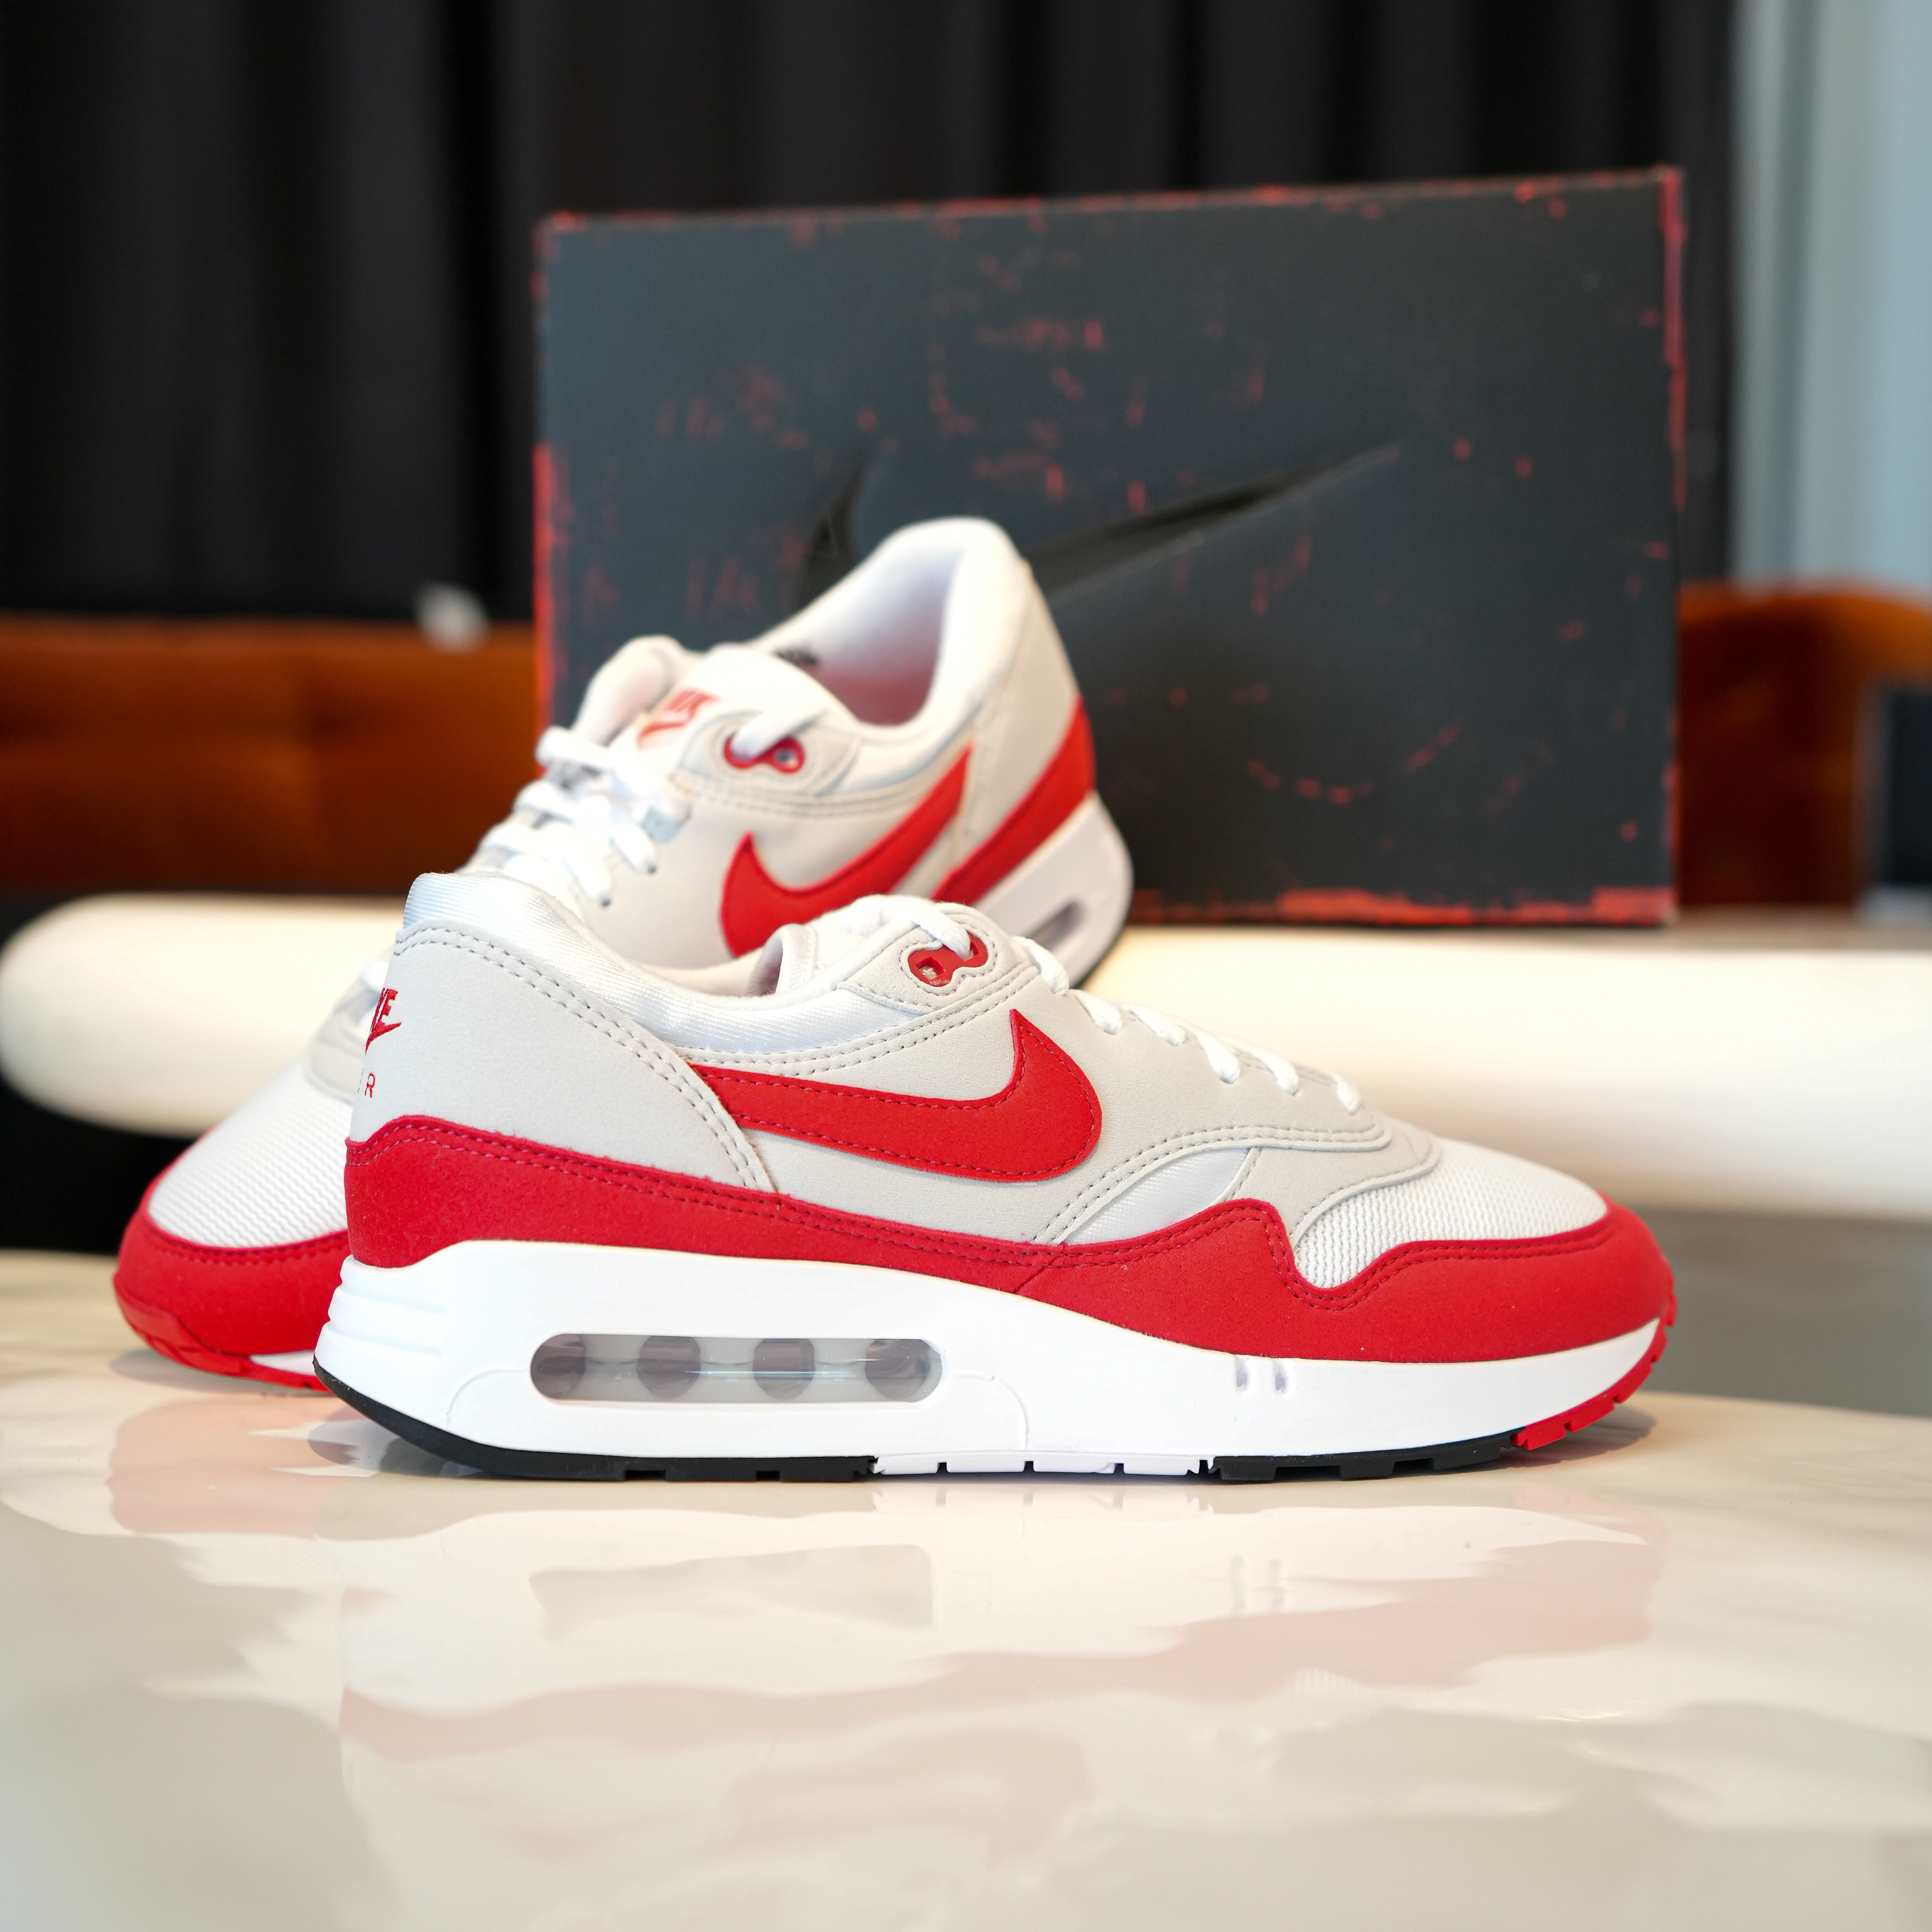 TheBetterGeneration on Twitter: "Nike Air Max 1 "Big Bubble" Men's Sizes  6-14 ($150) Women's Sizes 6-12 ($150) Available 03/26 In-Store FIRST!  Release Details ⬇️ https://t.co/rVph5JLmCi https://t.co/XBmKCrHKFR" /  Twitter